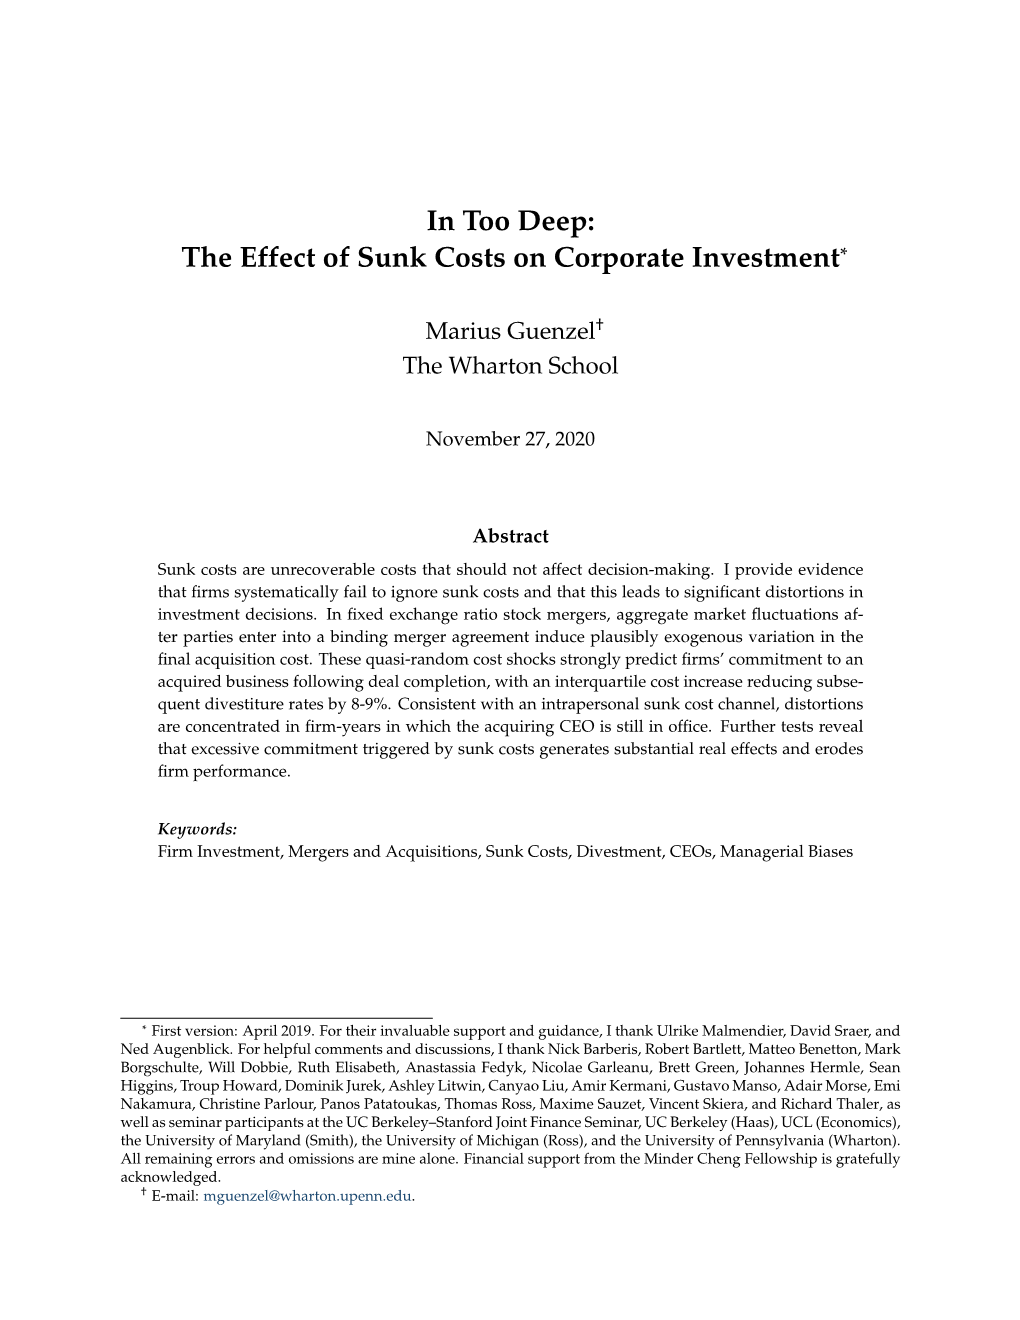 In Too Deep: the Effect of Sunk Costs on Corporate Investment*